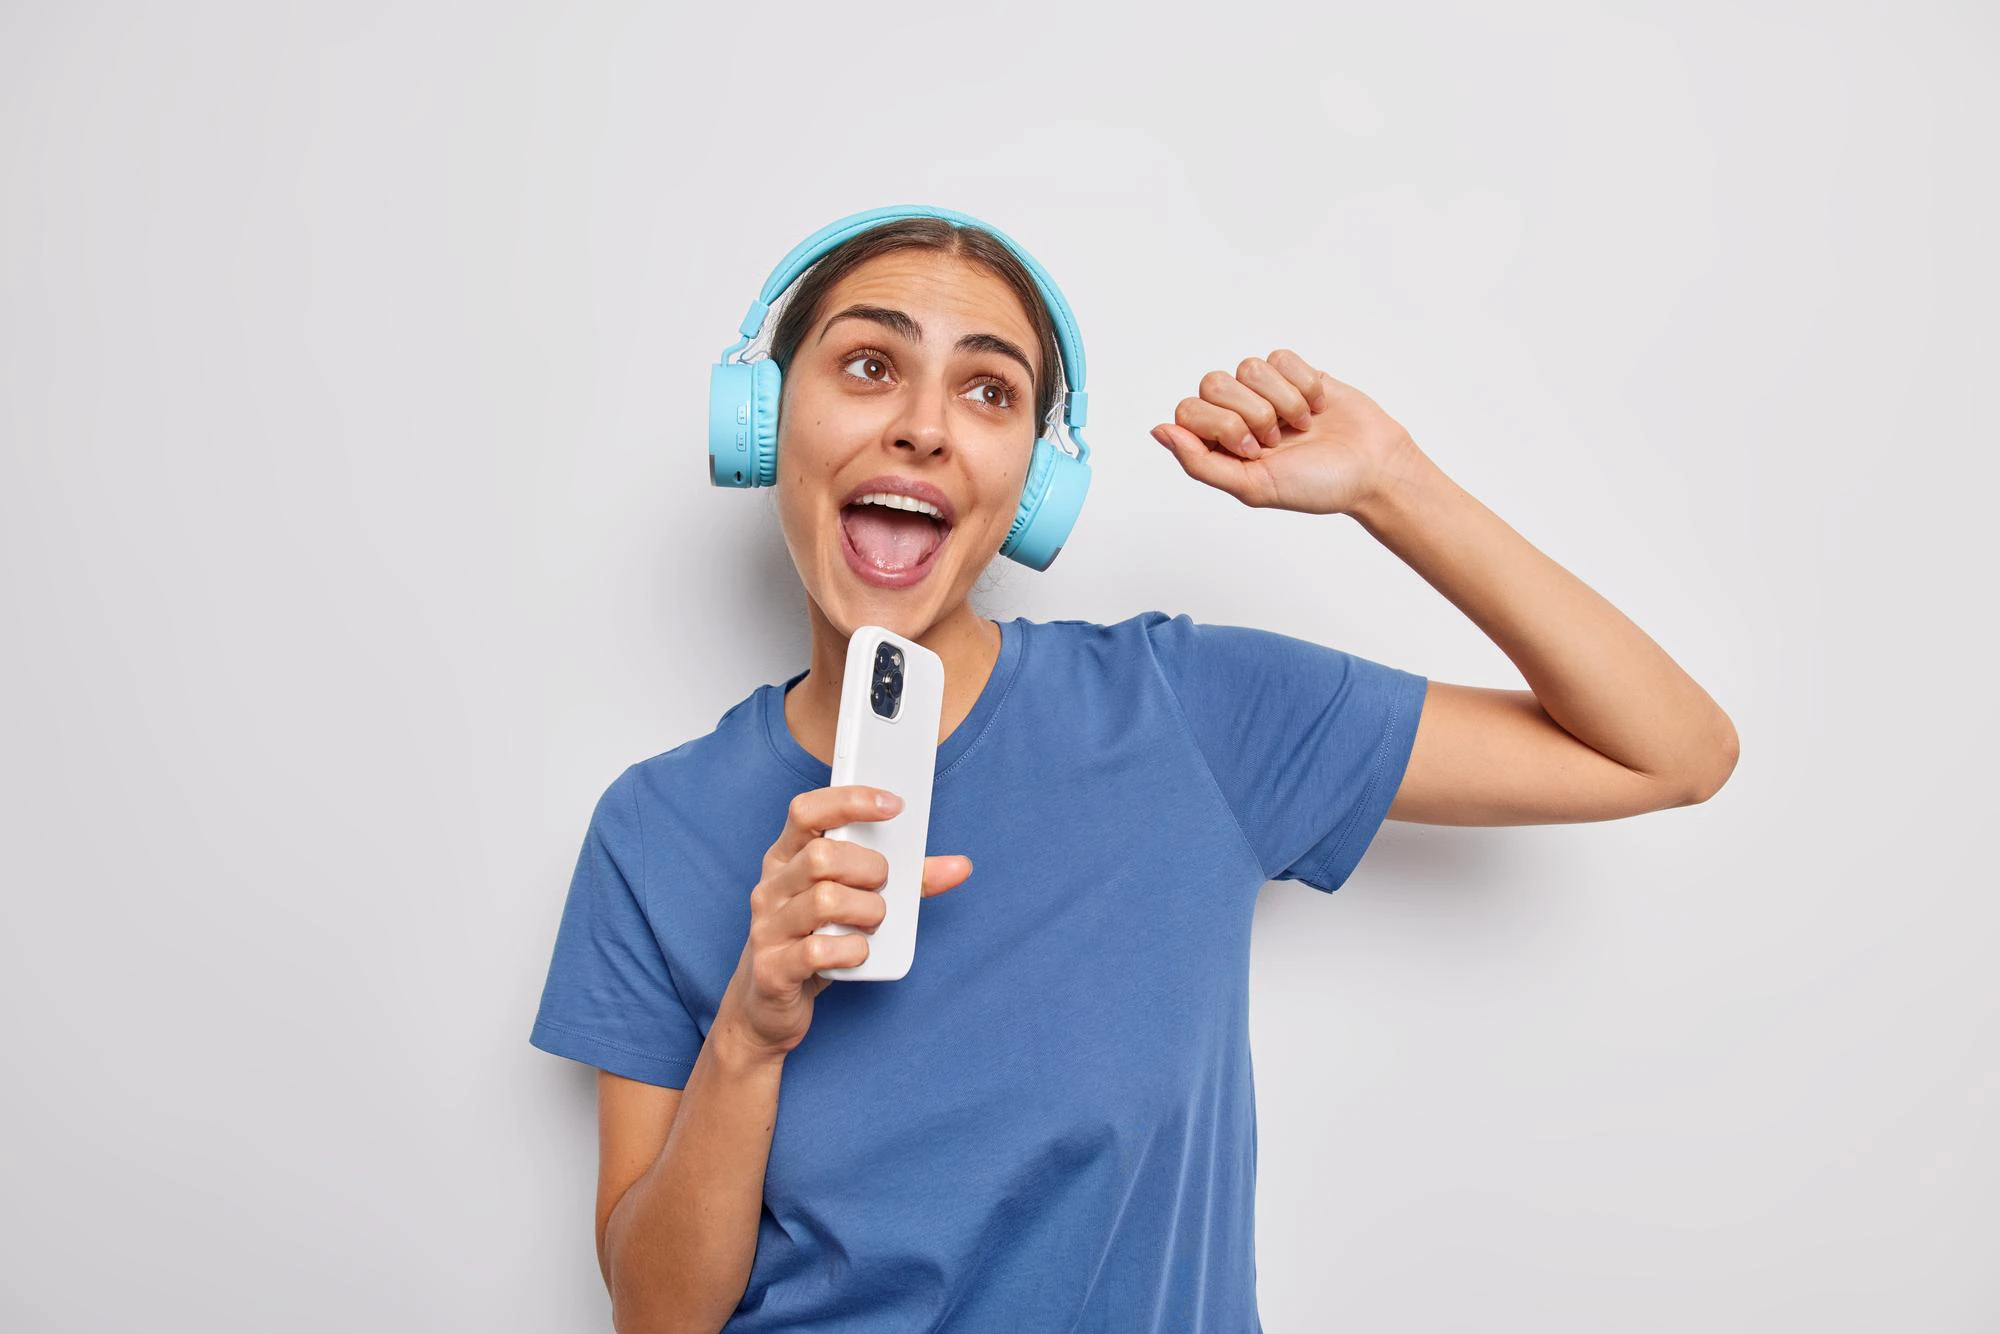 beautiful young european woman dances sing song holds modern smartphone as if microphone uses wireless stereo headphones wears casual t shirt has upbeat mood isolated white background 273609 61049